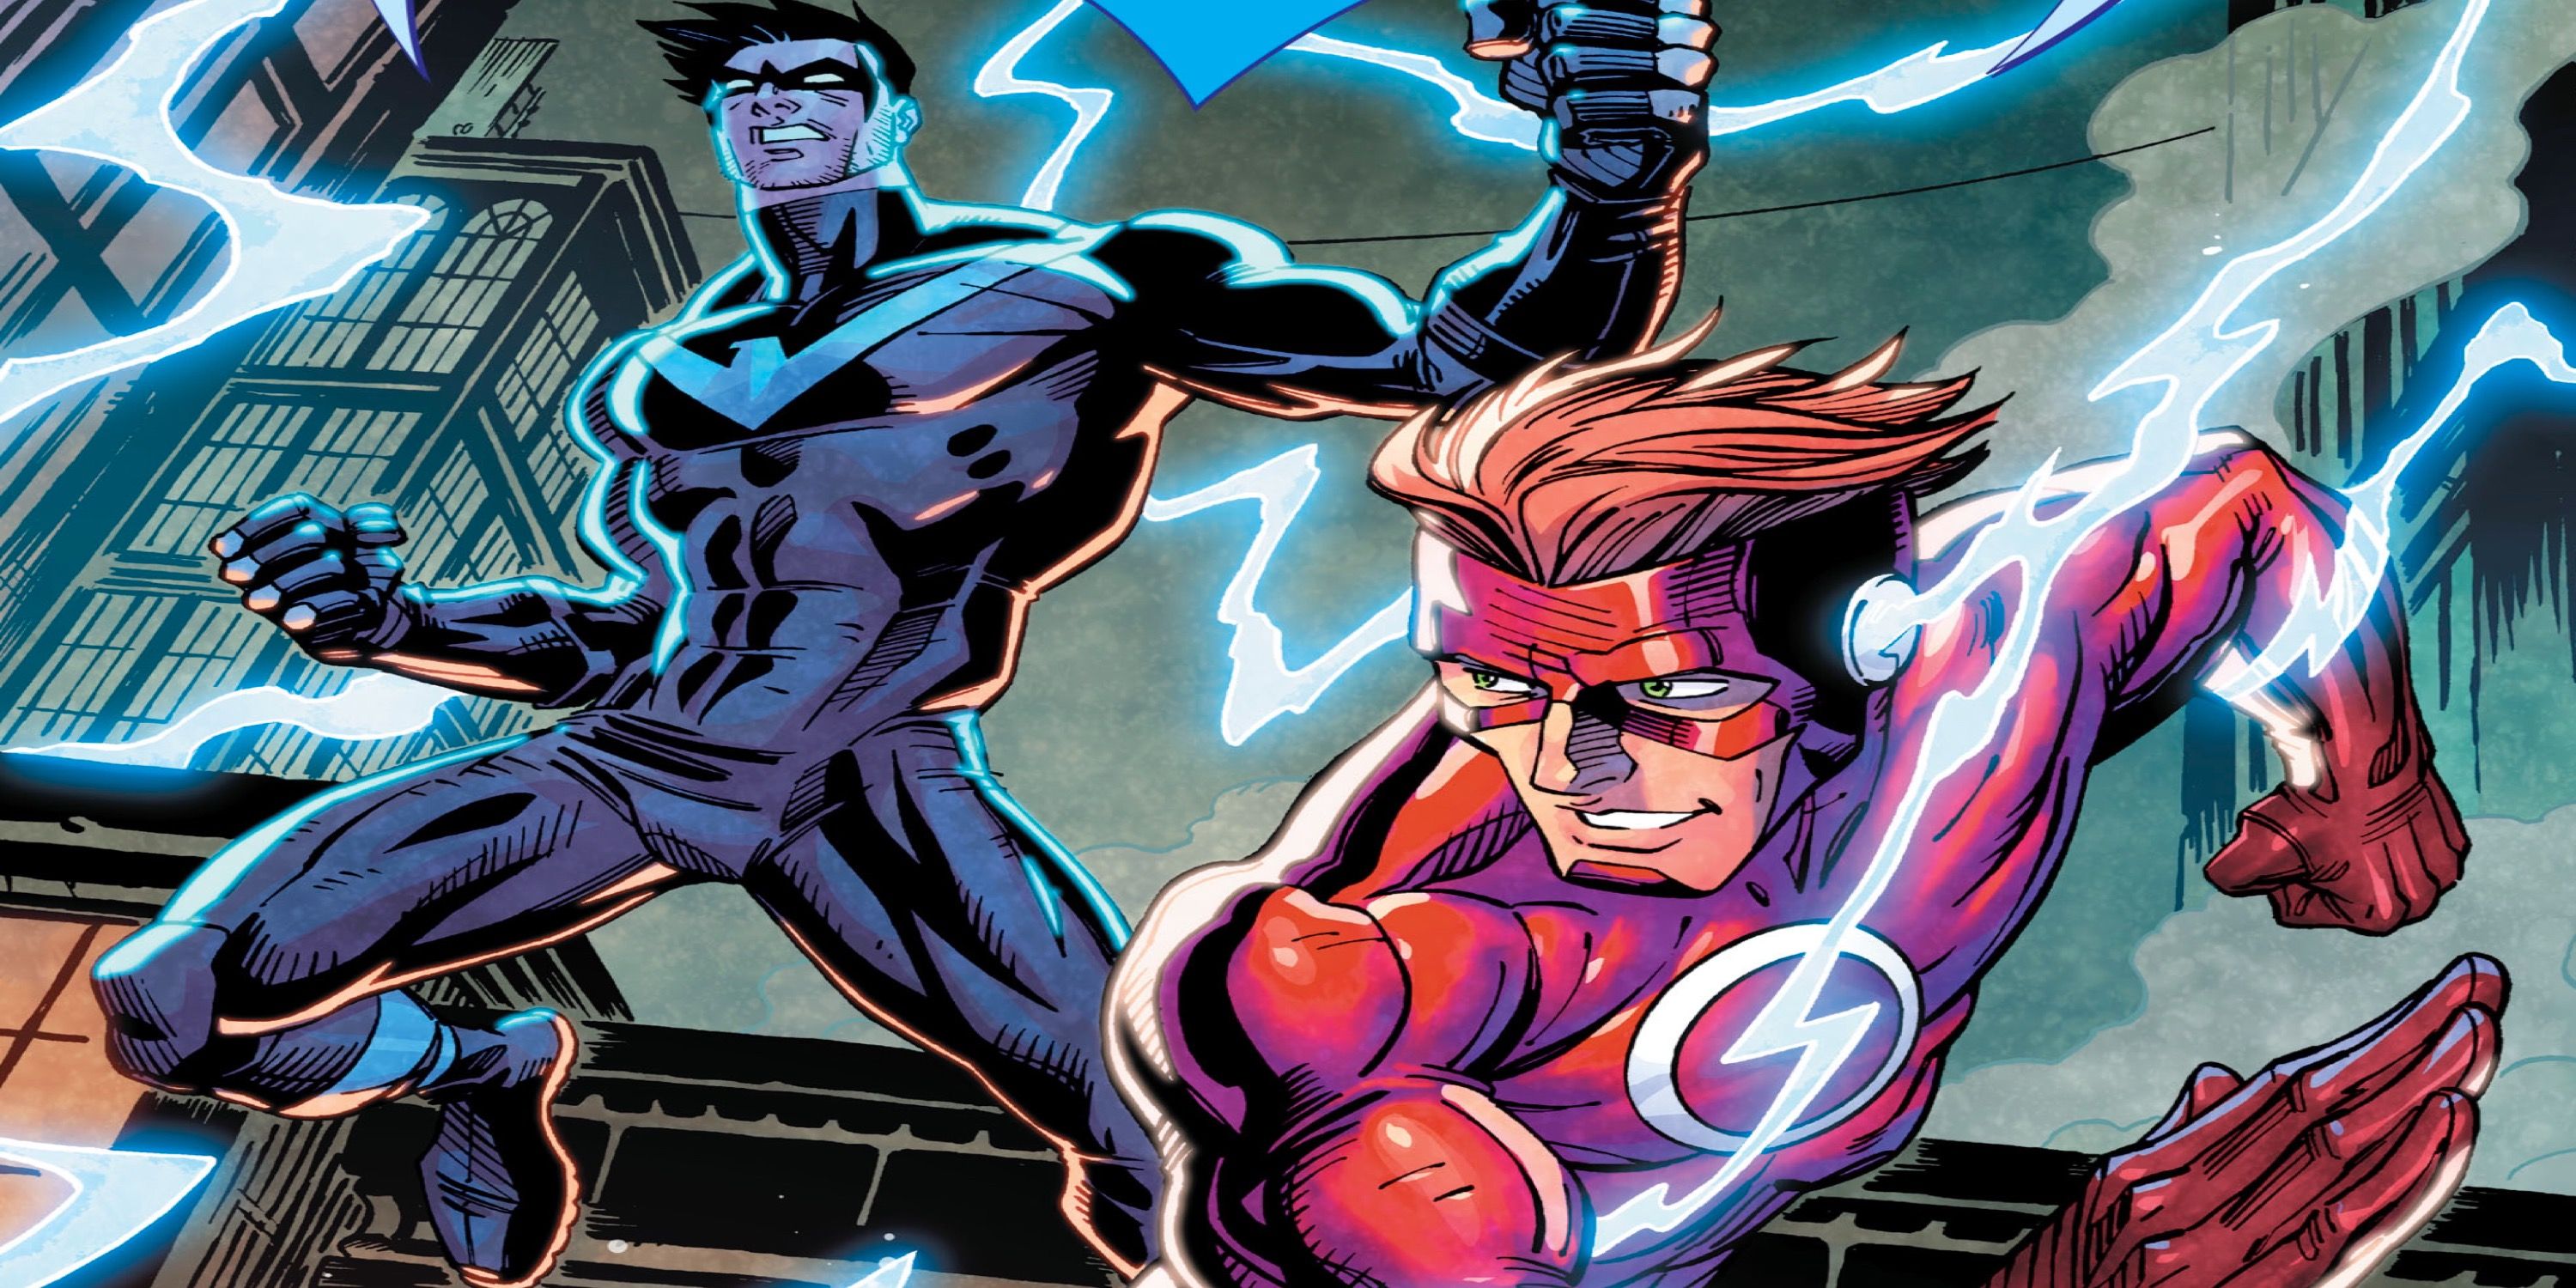 Dick Grayson Nightwing and Wally West Flash